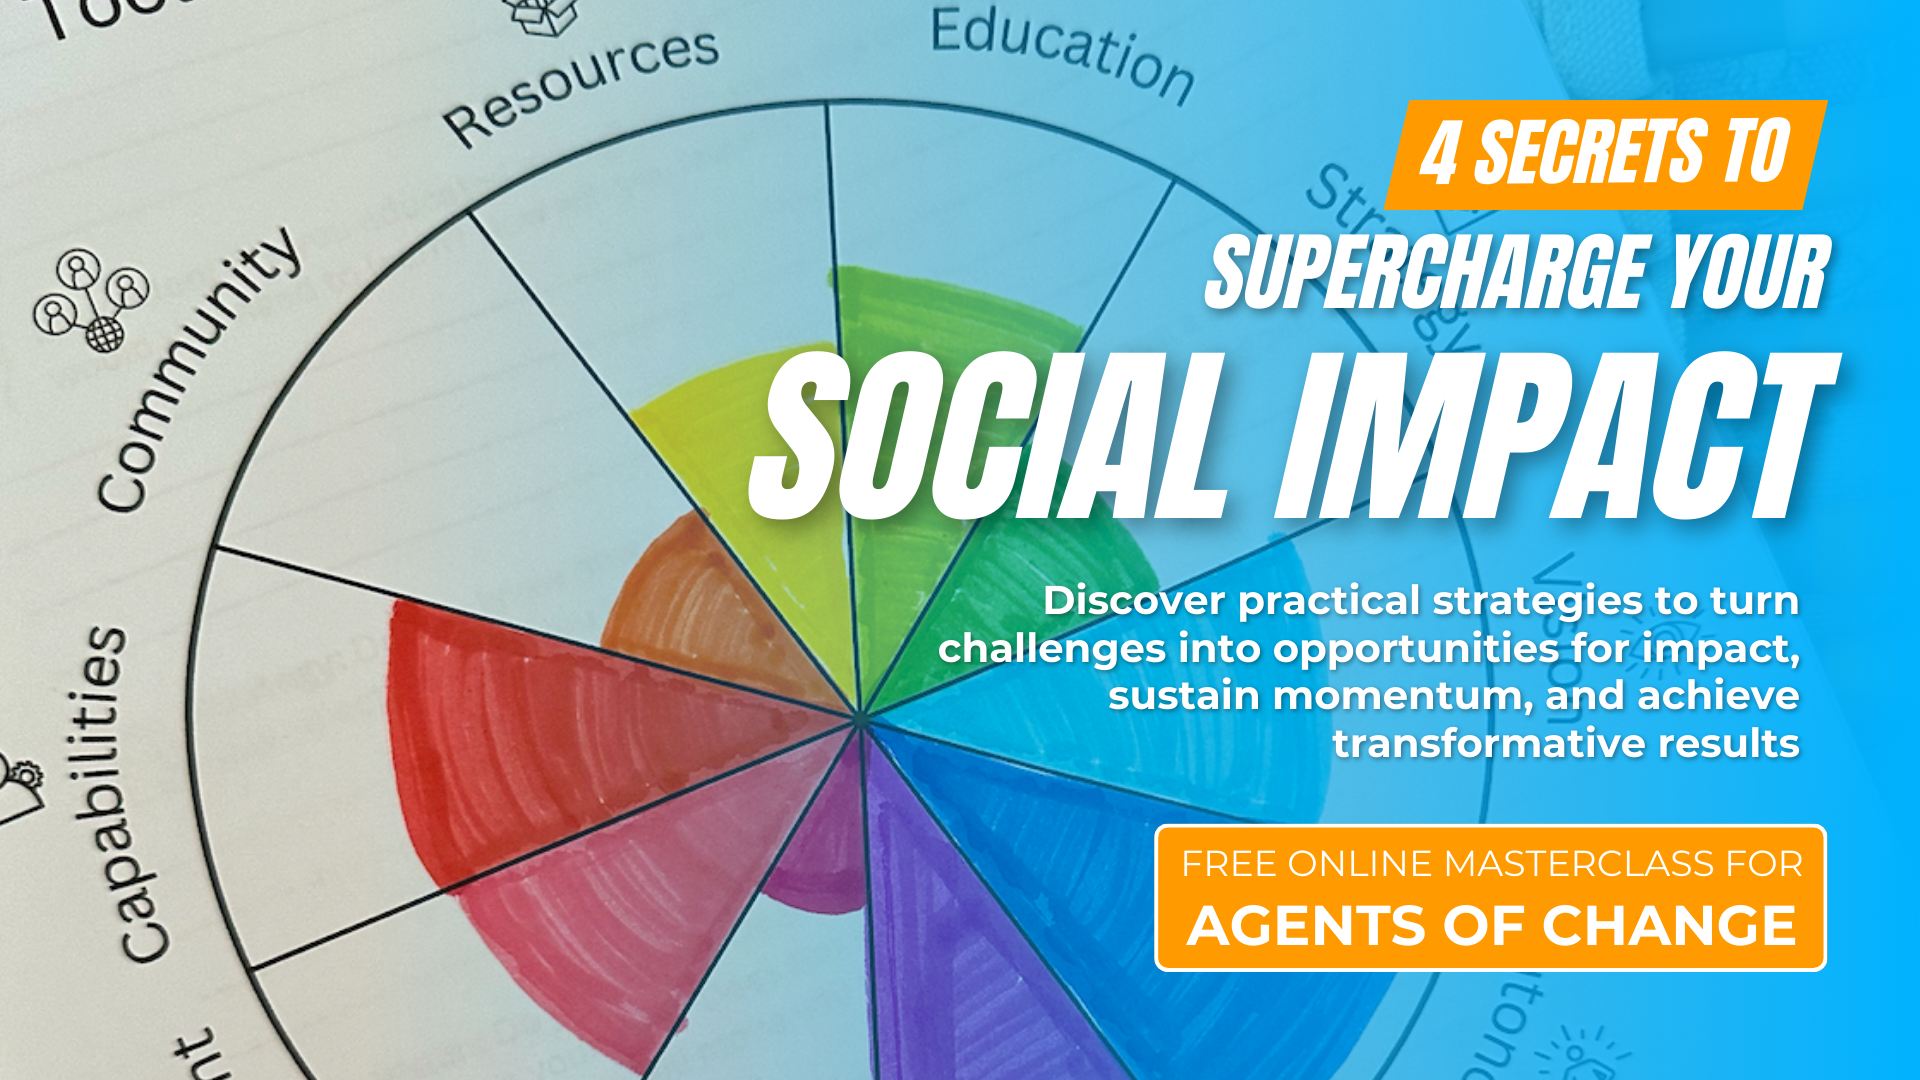 Supercharge Your Social Impact